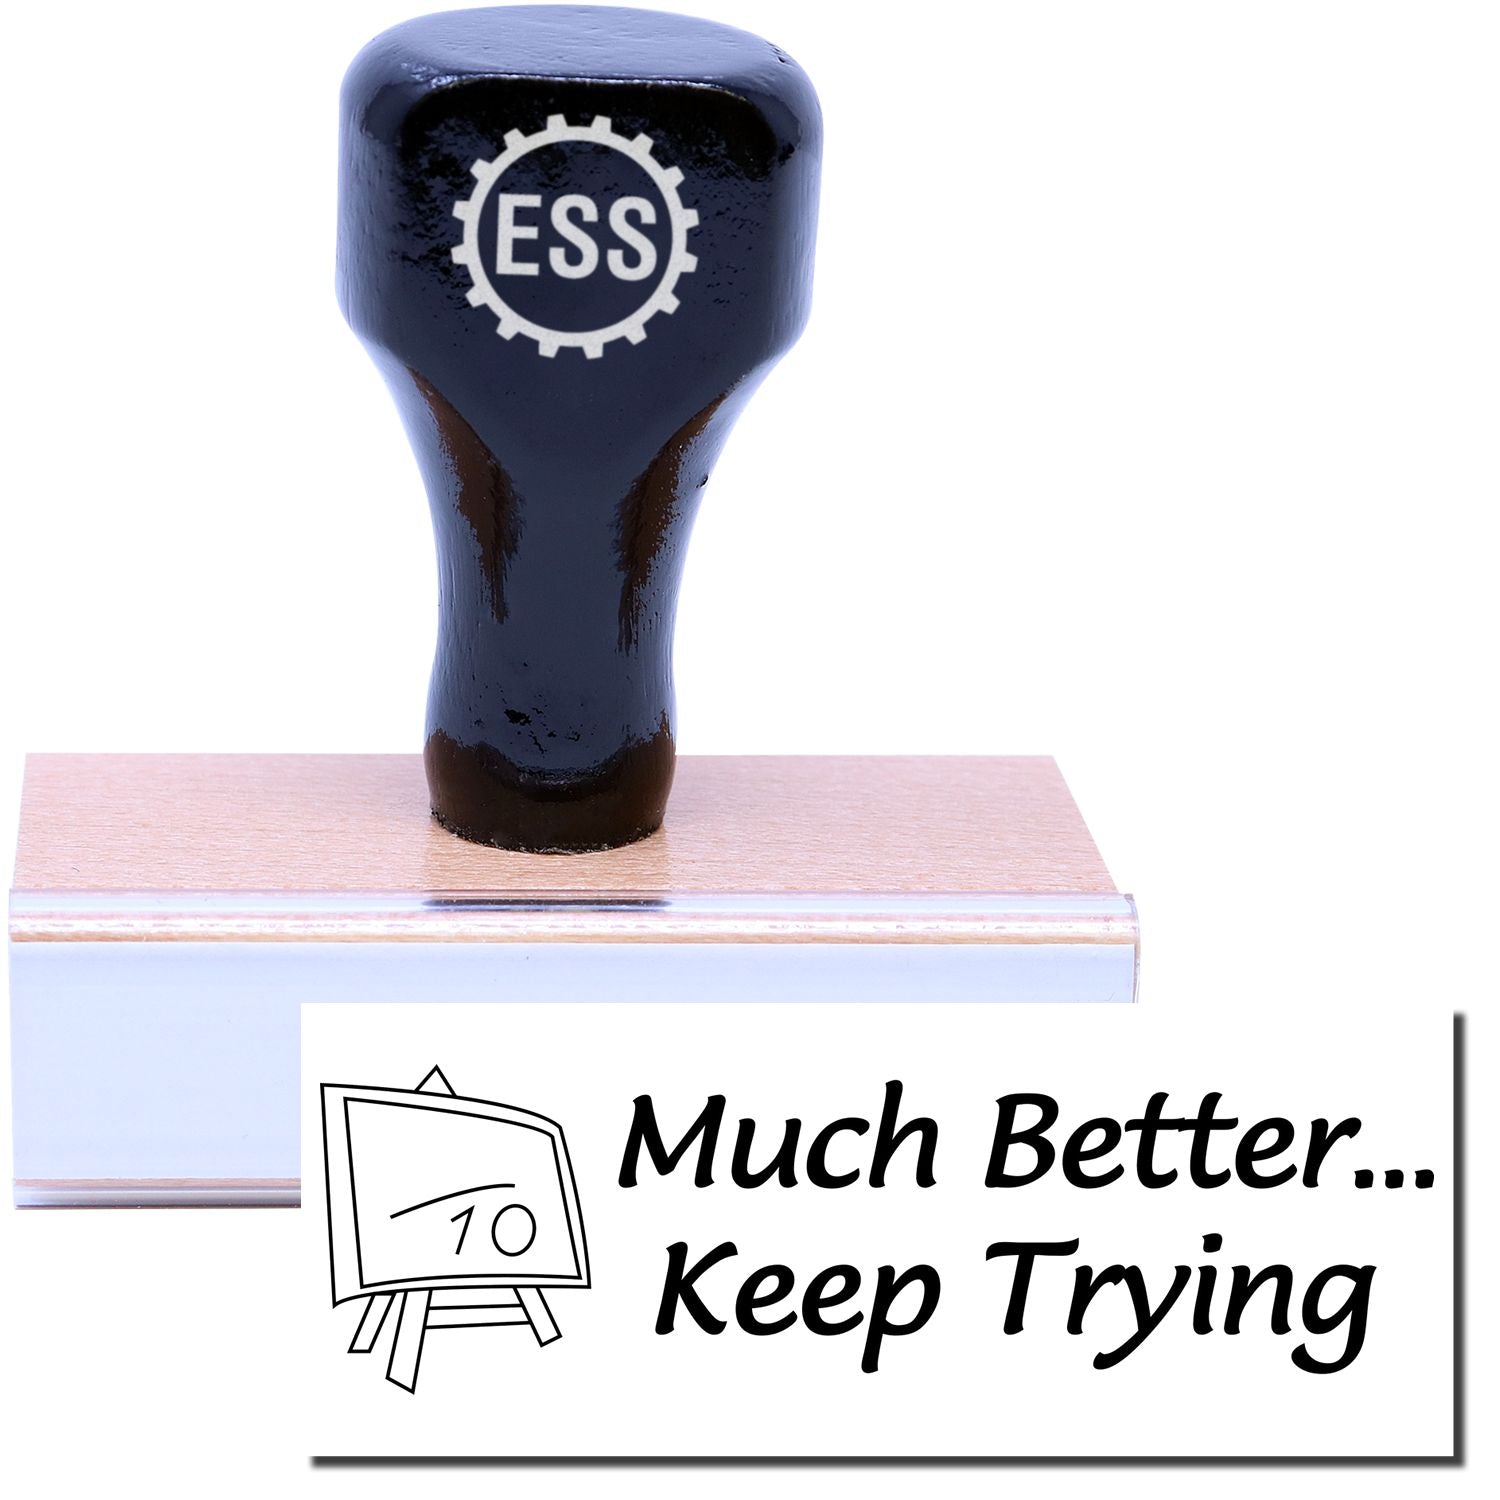 A stock office rubber stamp with a stamped image showing how the text "Much Better... Keep Trying" in a large font with an image showing a blackboard with a line over the number 10 is displayed after stamping.